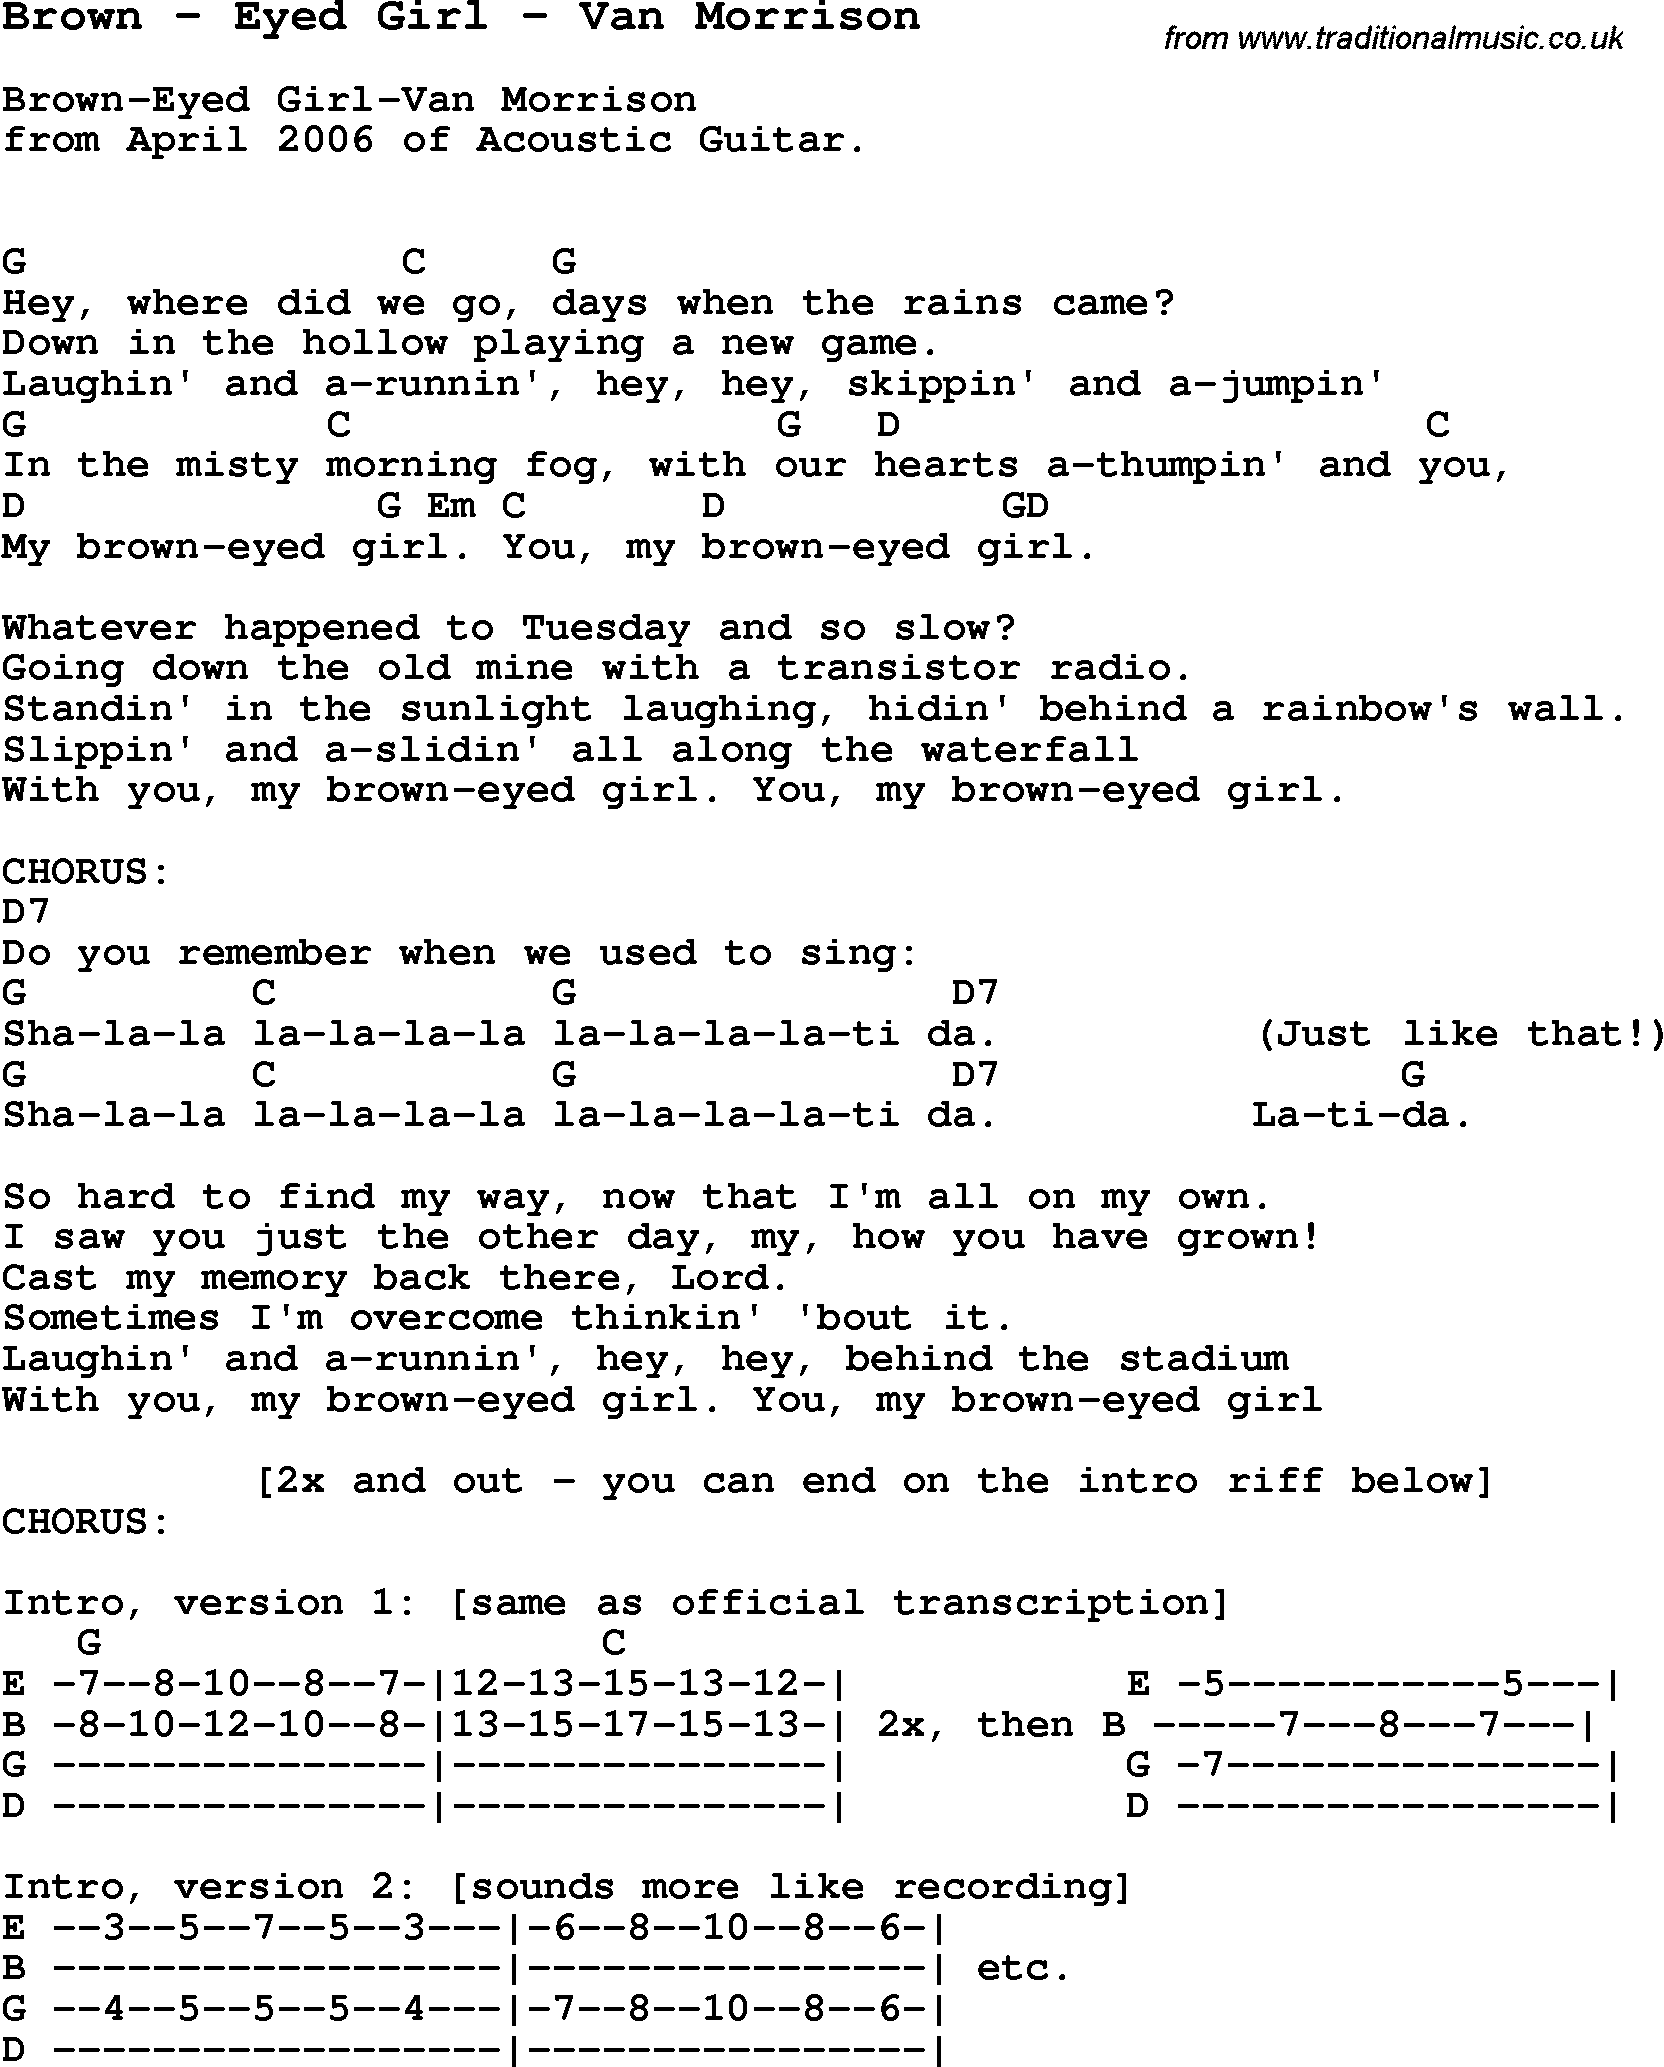 Song Brown by Eyed Girl by Van Morrison, with lyrics for vocal performance and accompaniment chords for Ukulele, Guitar Banjo etc.